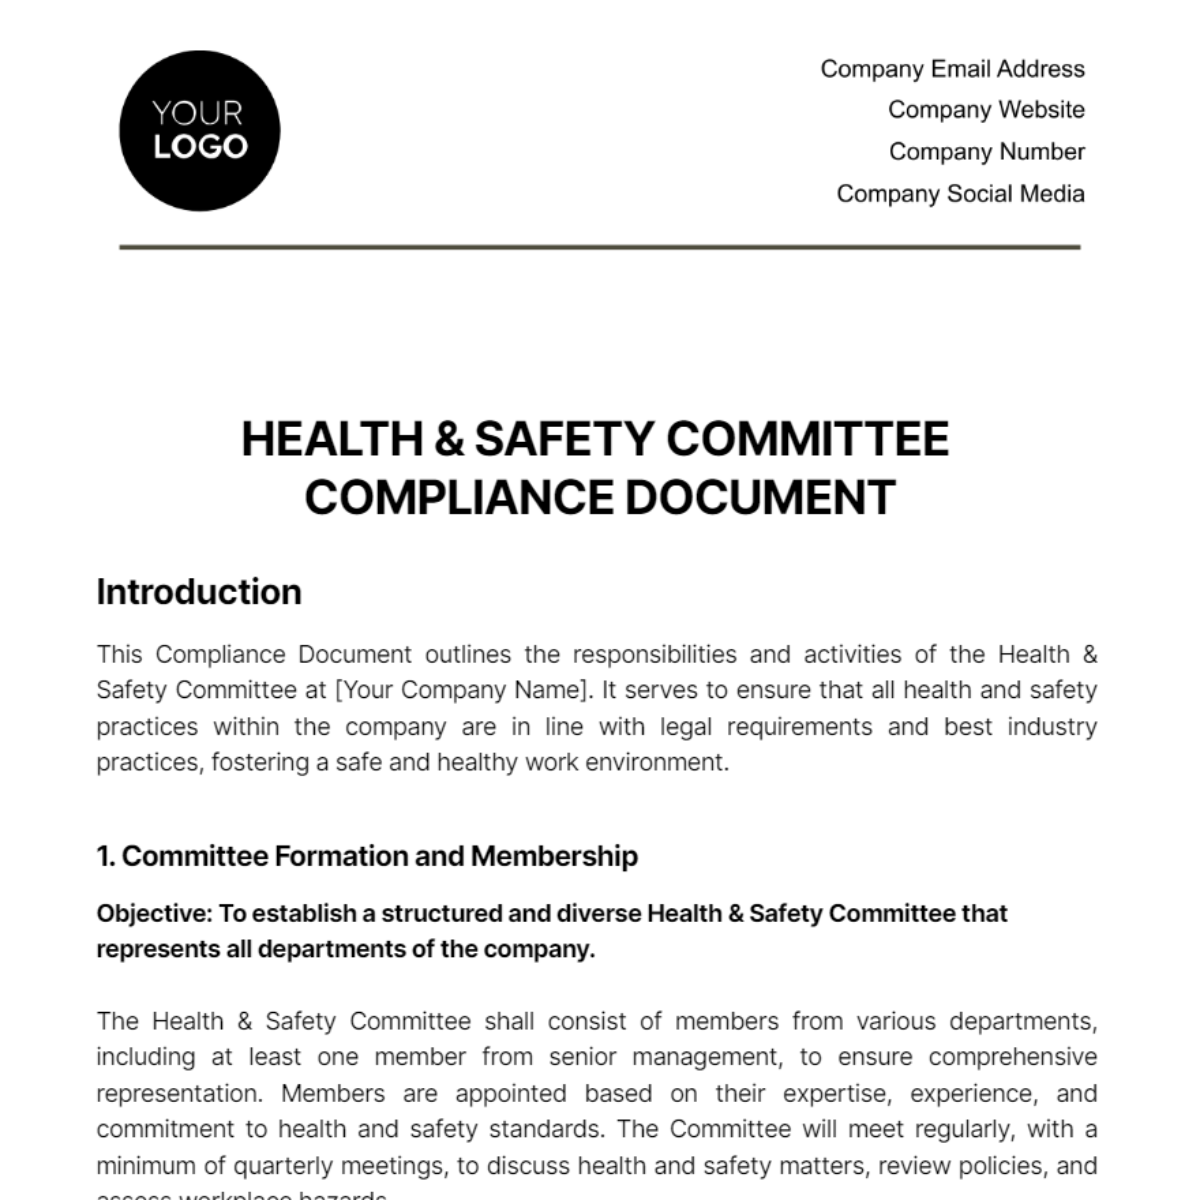 Health & Safety Committee Compliance Document Template